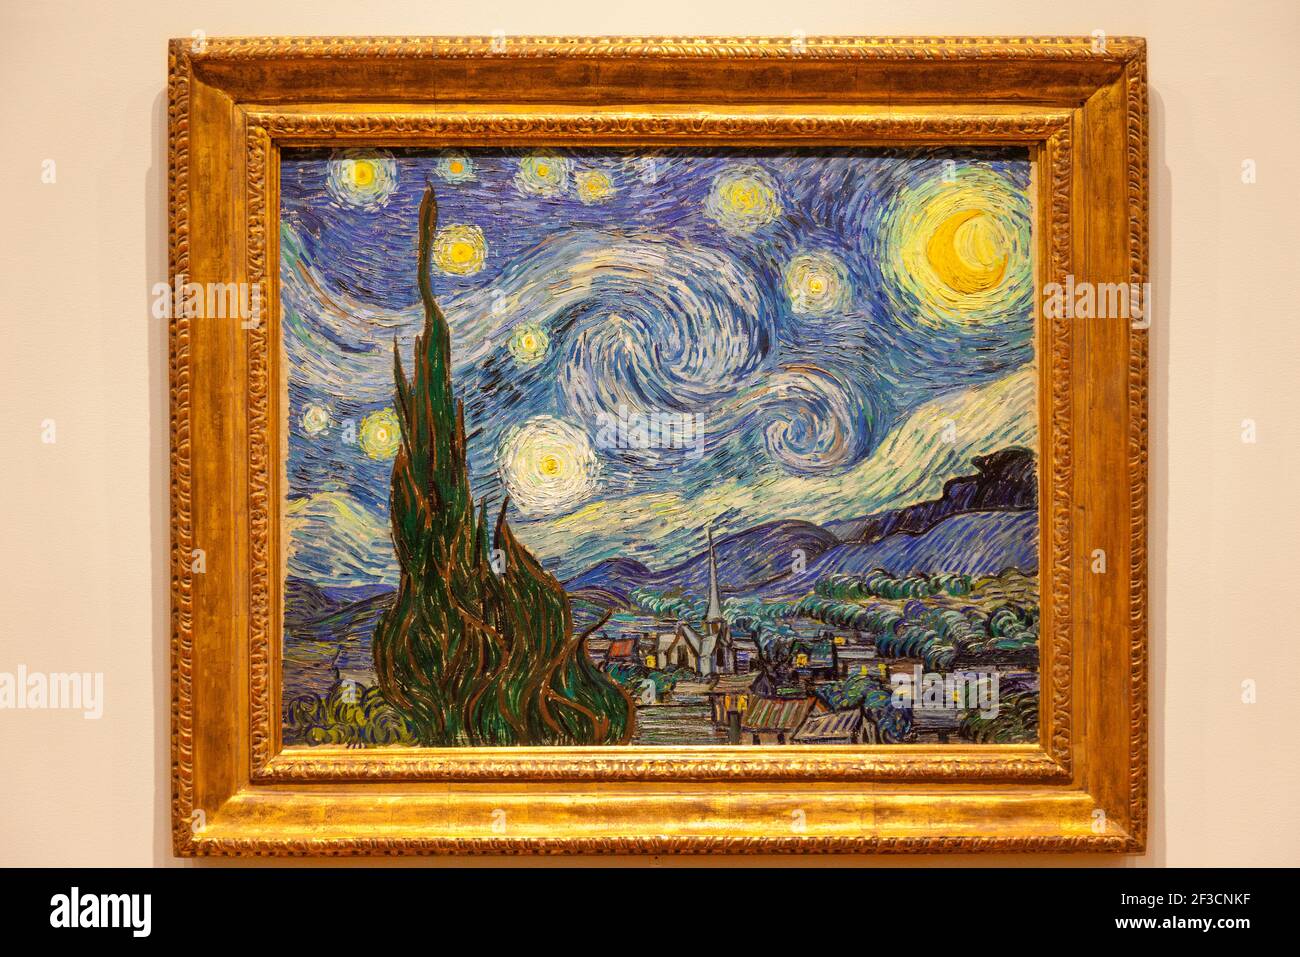 Vincent Van Gogh's 'Starry Night' on display at the Museum of Modern Art, New York City, USA Stock Photo